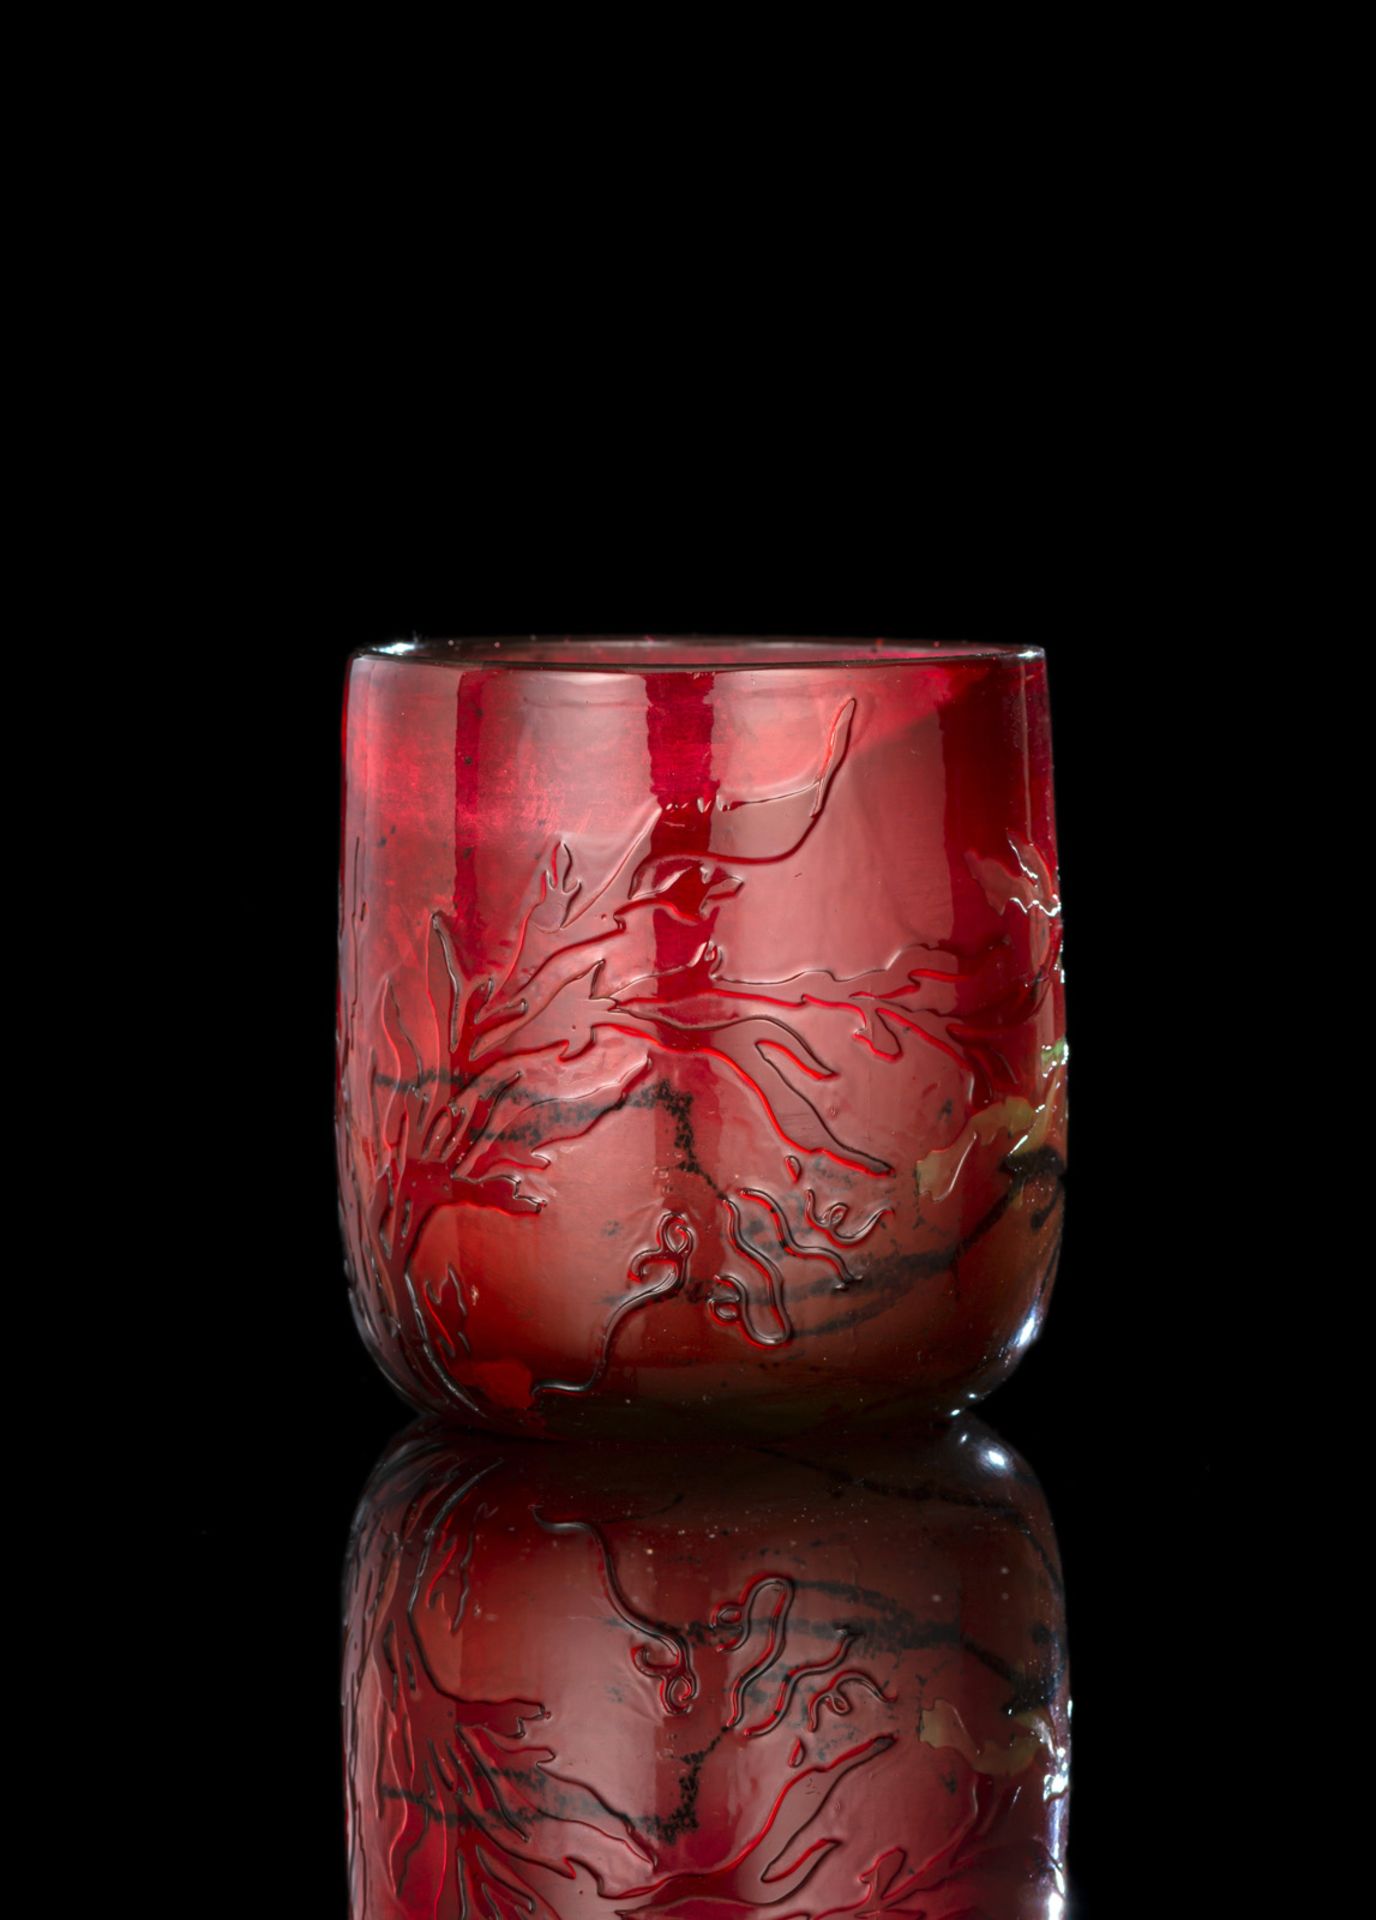 A RARE GALLE INTERCALAIRE AND CAMEO GLASS VASE "DECOR D'ALGUES" - Image 2 of 4